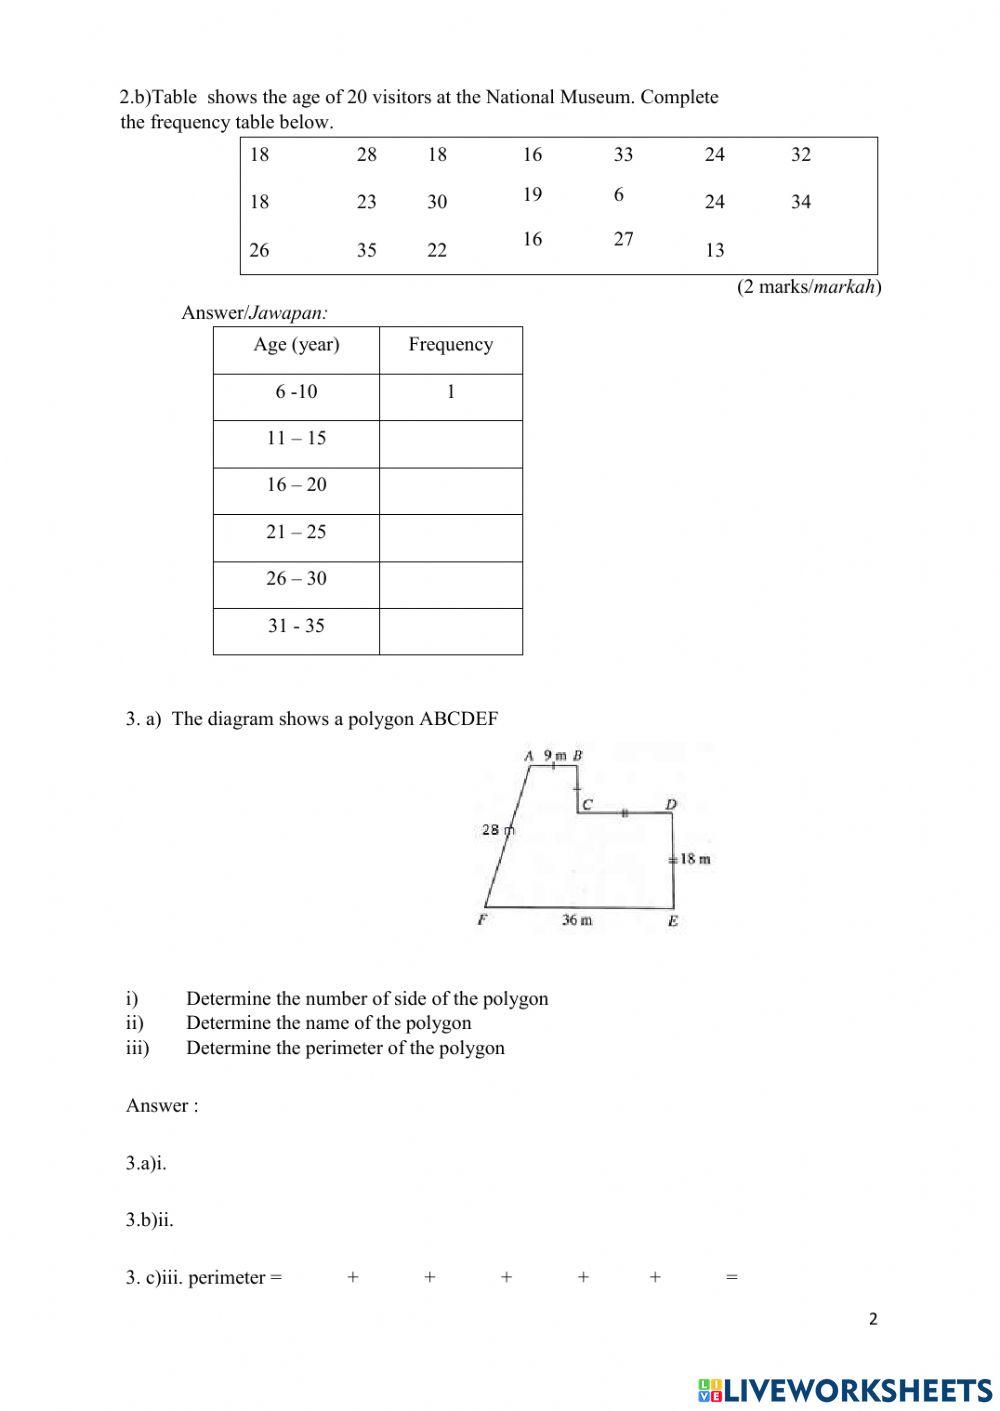 Revision 13.2 form 2 section C